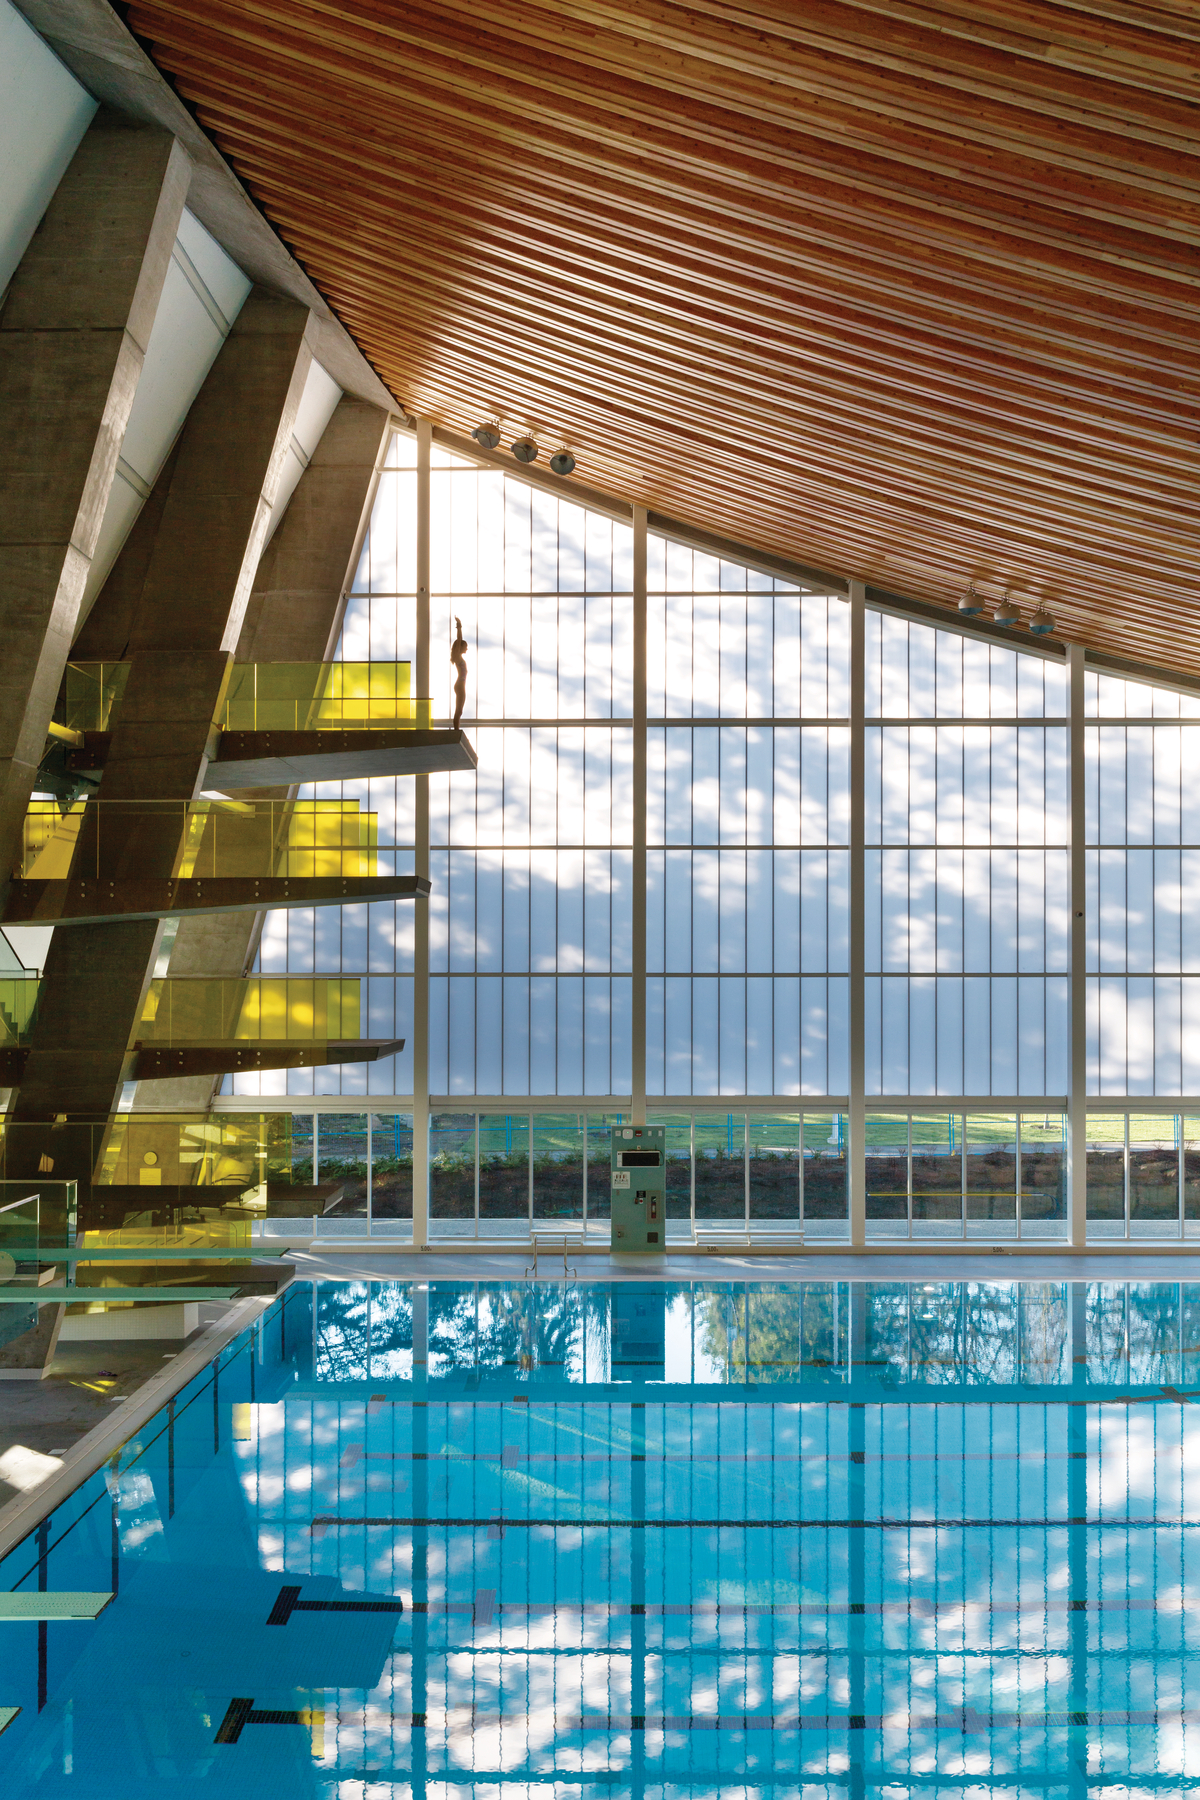 Interior daytime view of Grandview Heights Aquatic Centre showing sweeping curved Glue-laminated timber (Glulam) ceiling supported by concrete columns with entire wall of glass in background and diver on 10 meter platform in foreground